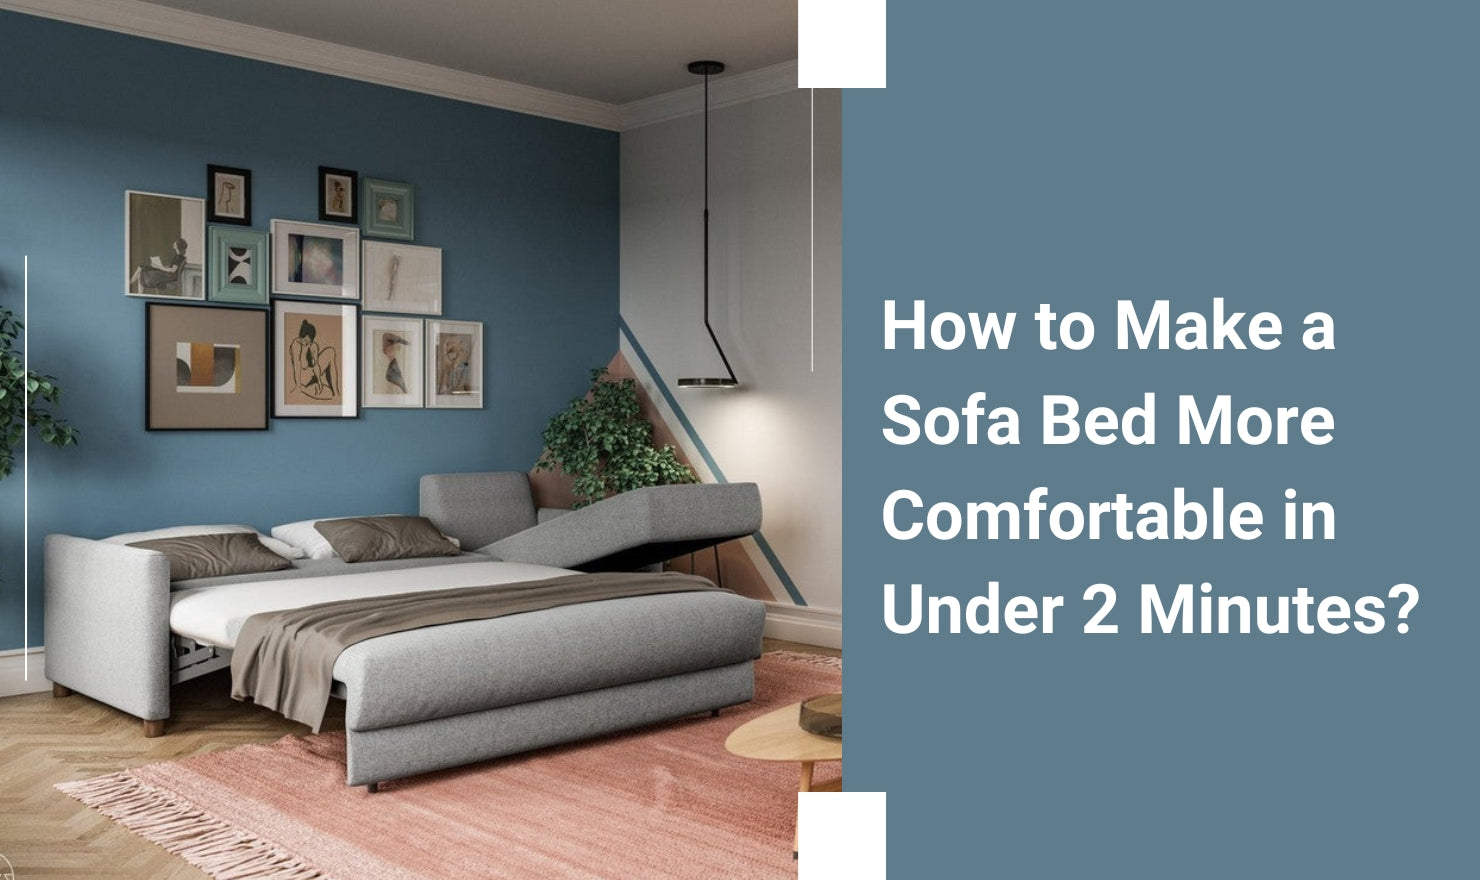 How To Make Sofa Bed More Comfortable